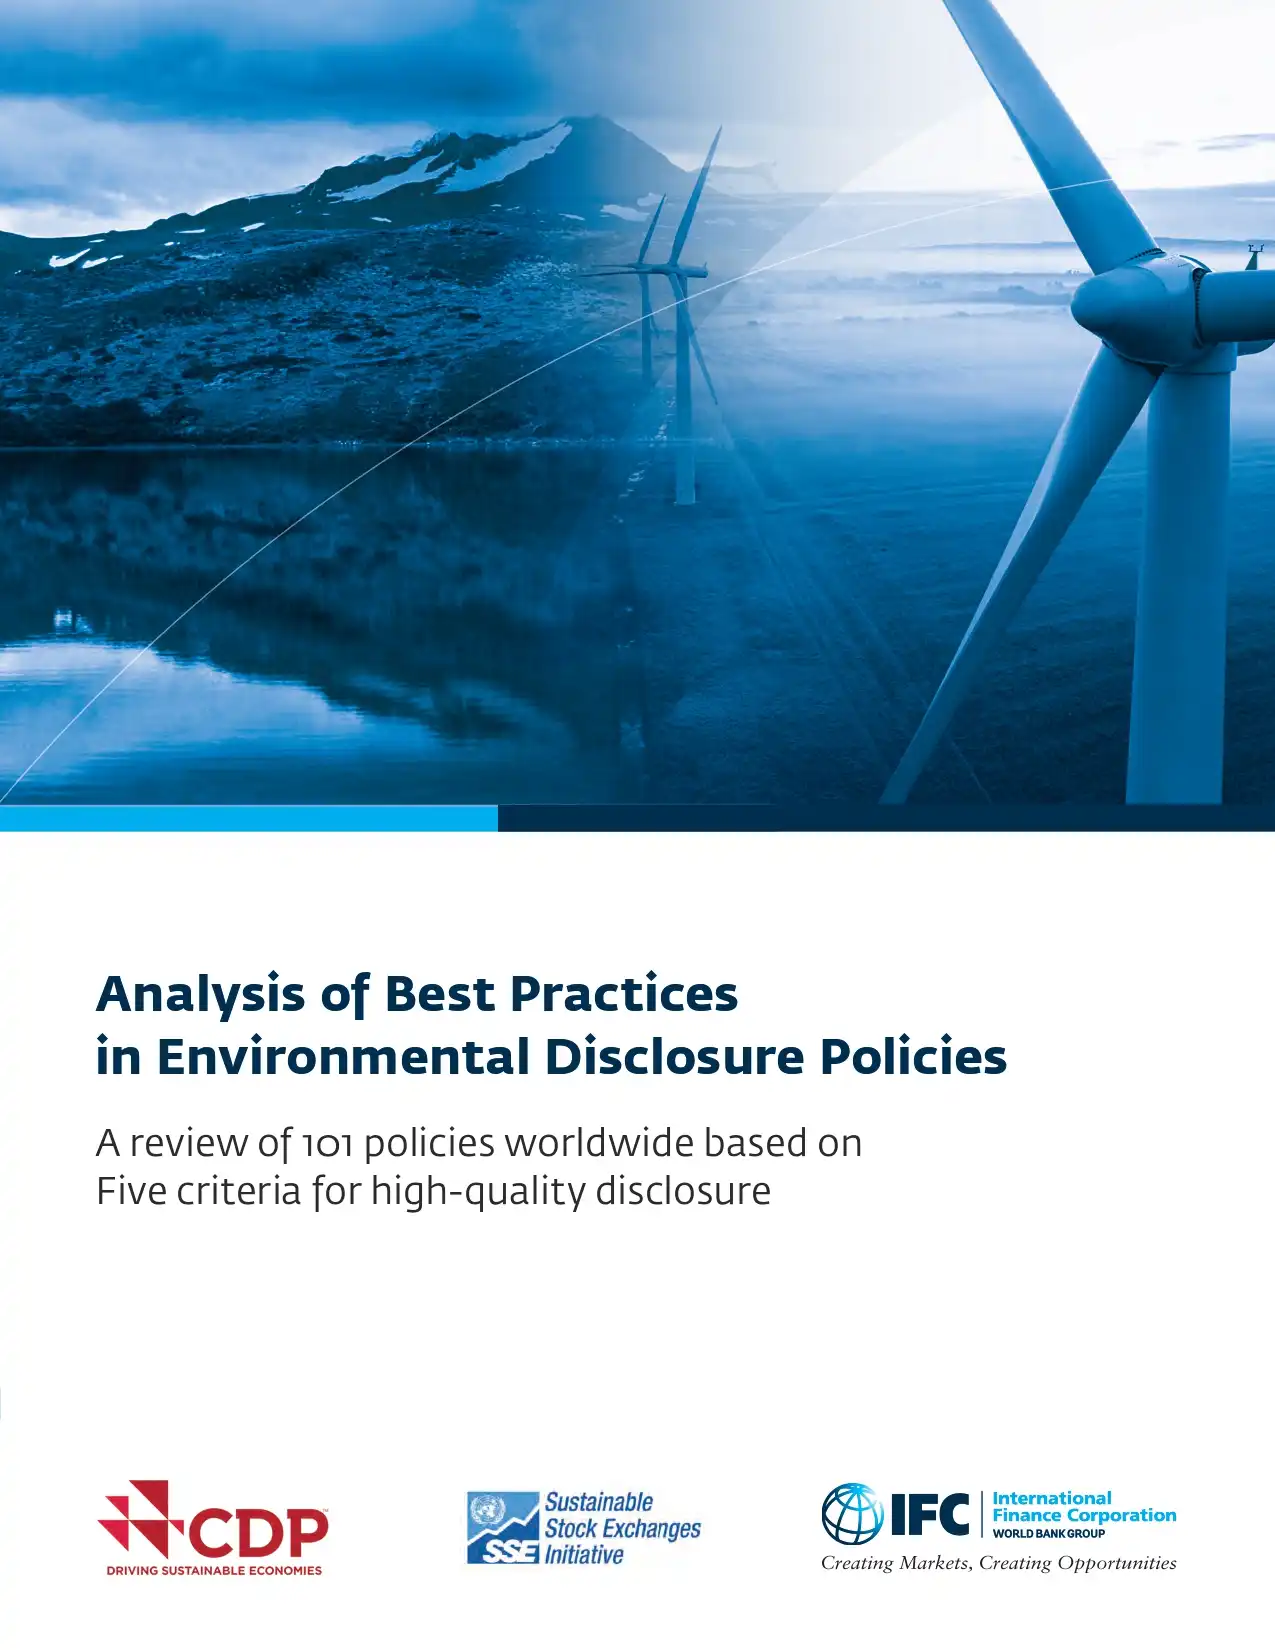 Analysis of Best Practices in Environmental Disclosure Policies